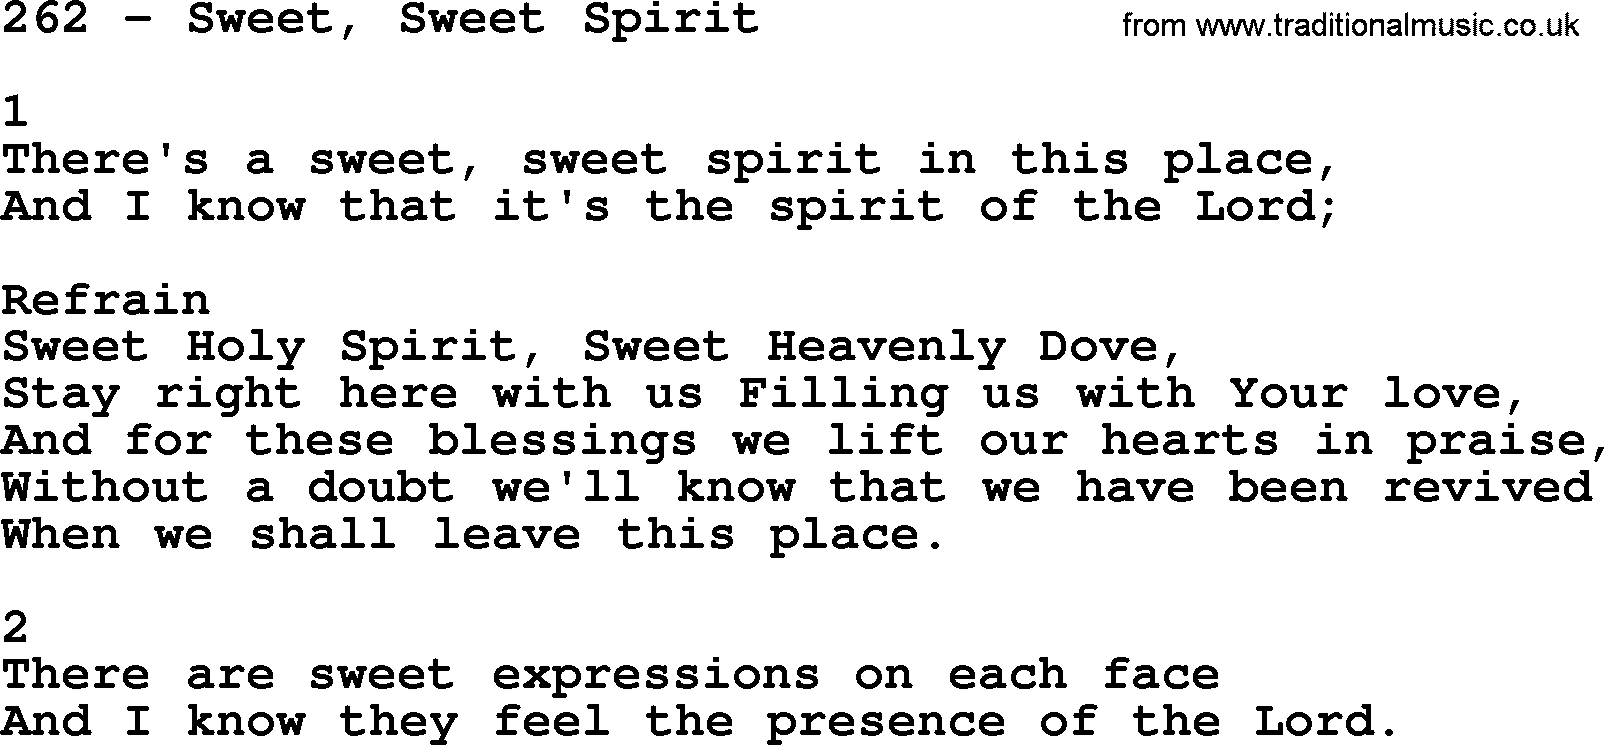 Complete Adventis Hymnal, title: 262-Sweet, Sweet Spirit, with lyrics, midi, mp3, powerpoints(PPT) and PDF,